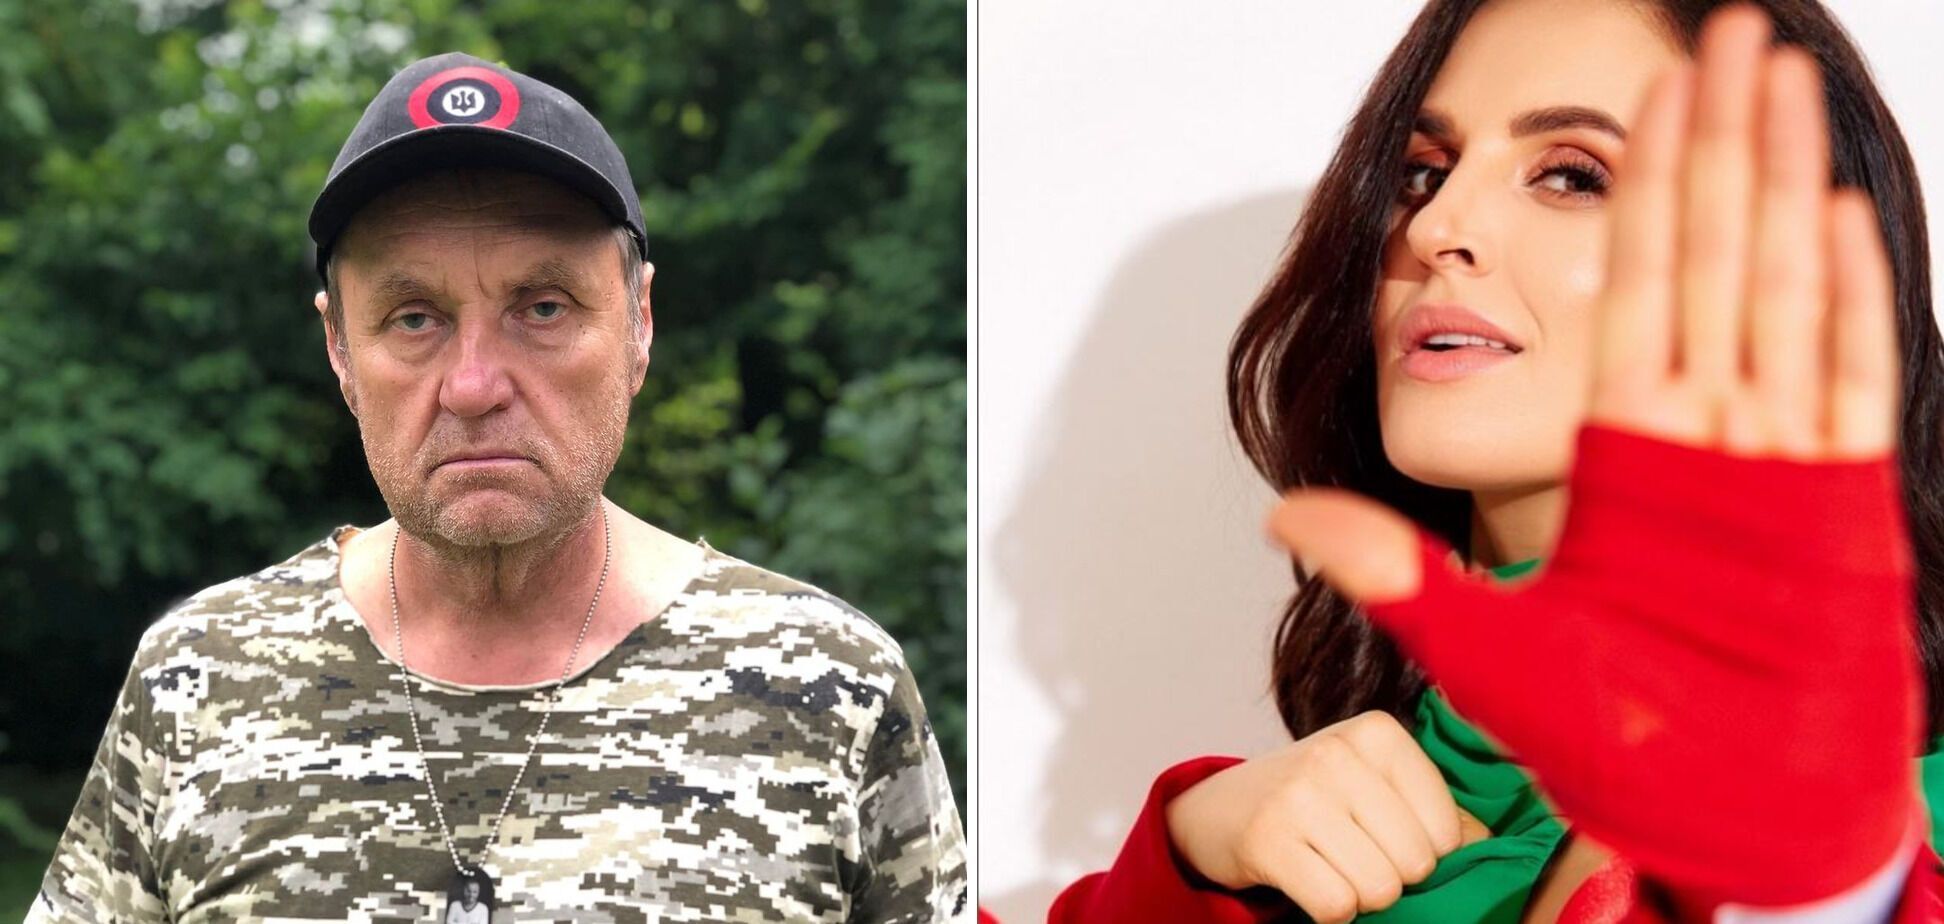 Called old and lazy: Ukrainian singer confessed why she will never communicate with ex-producer Bebeshko again